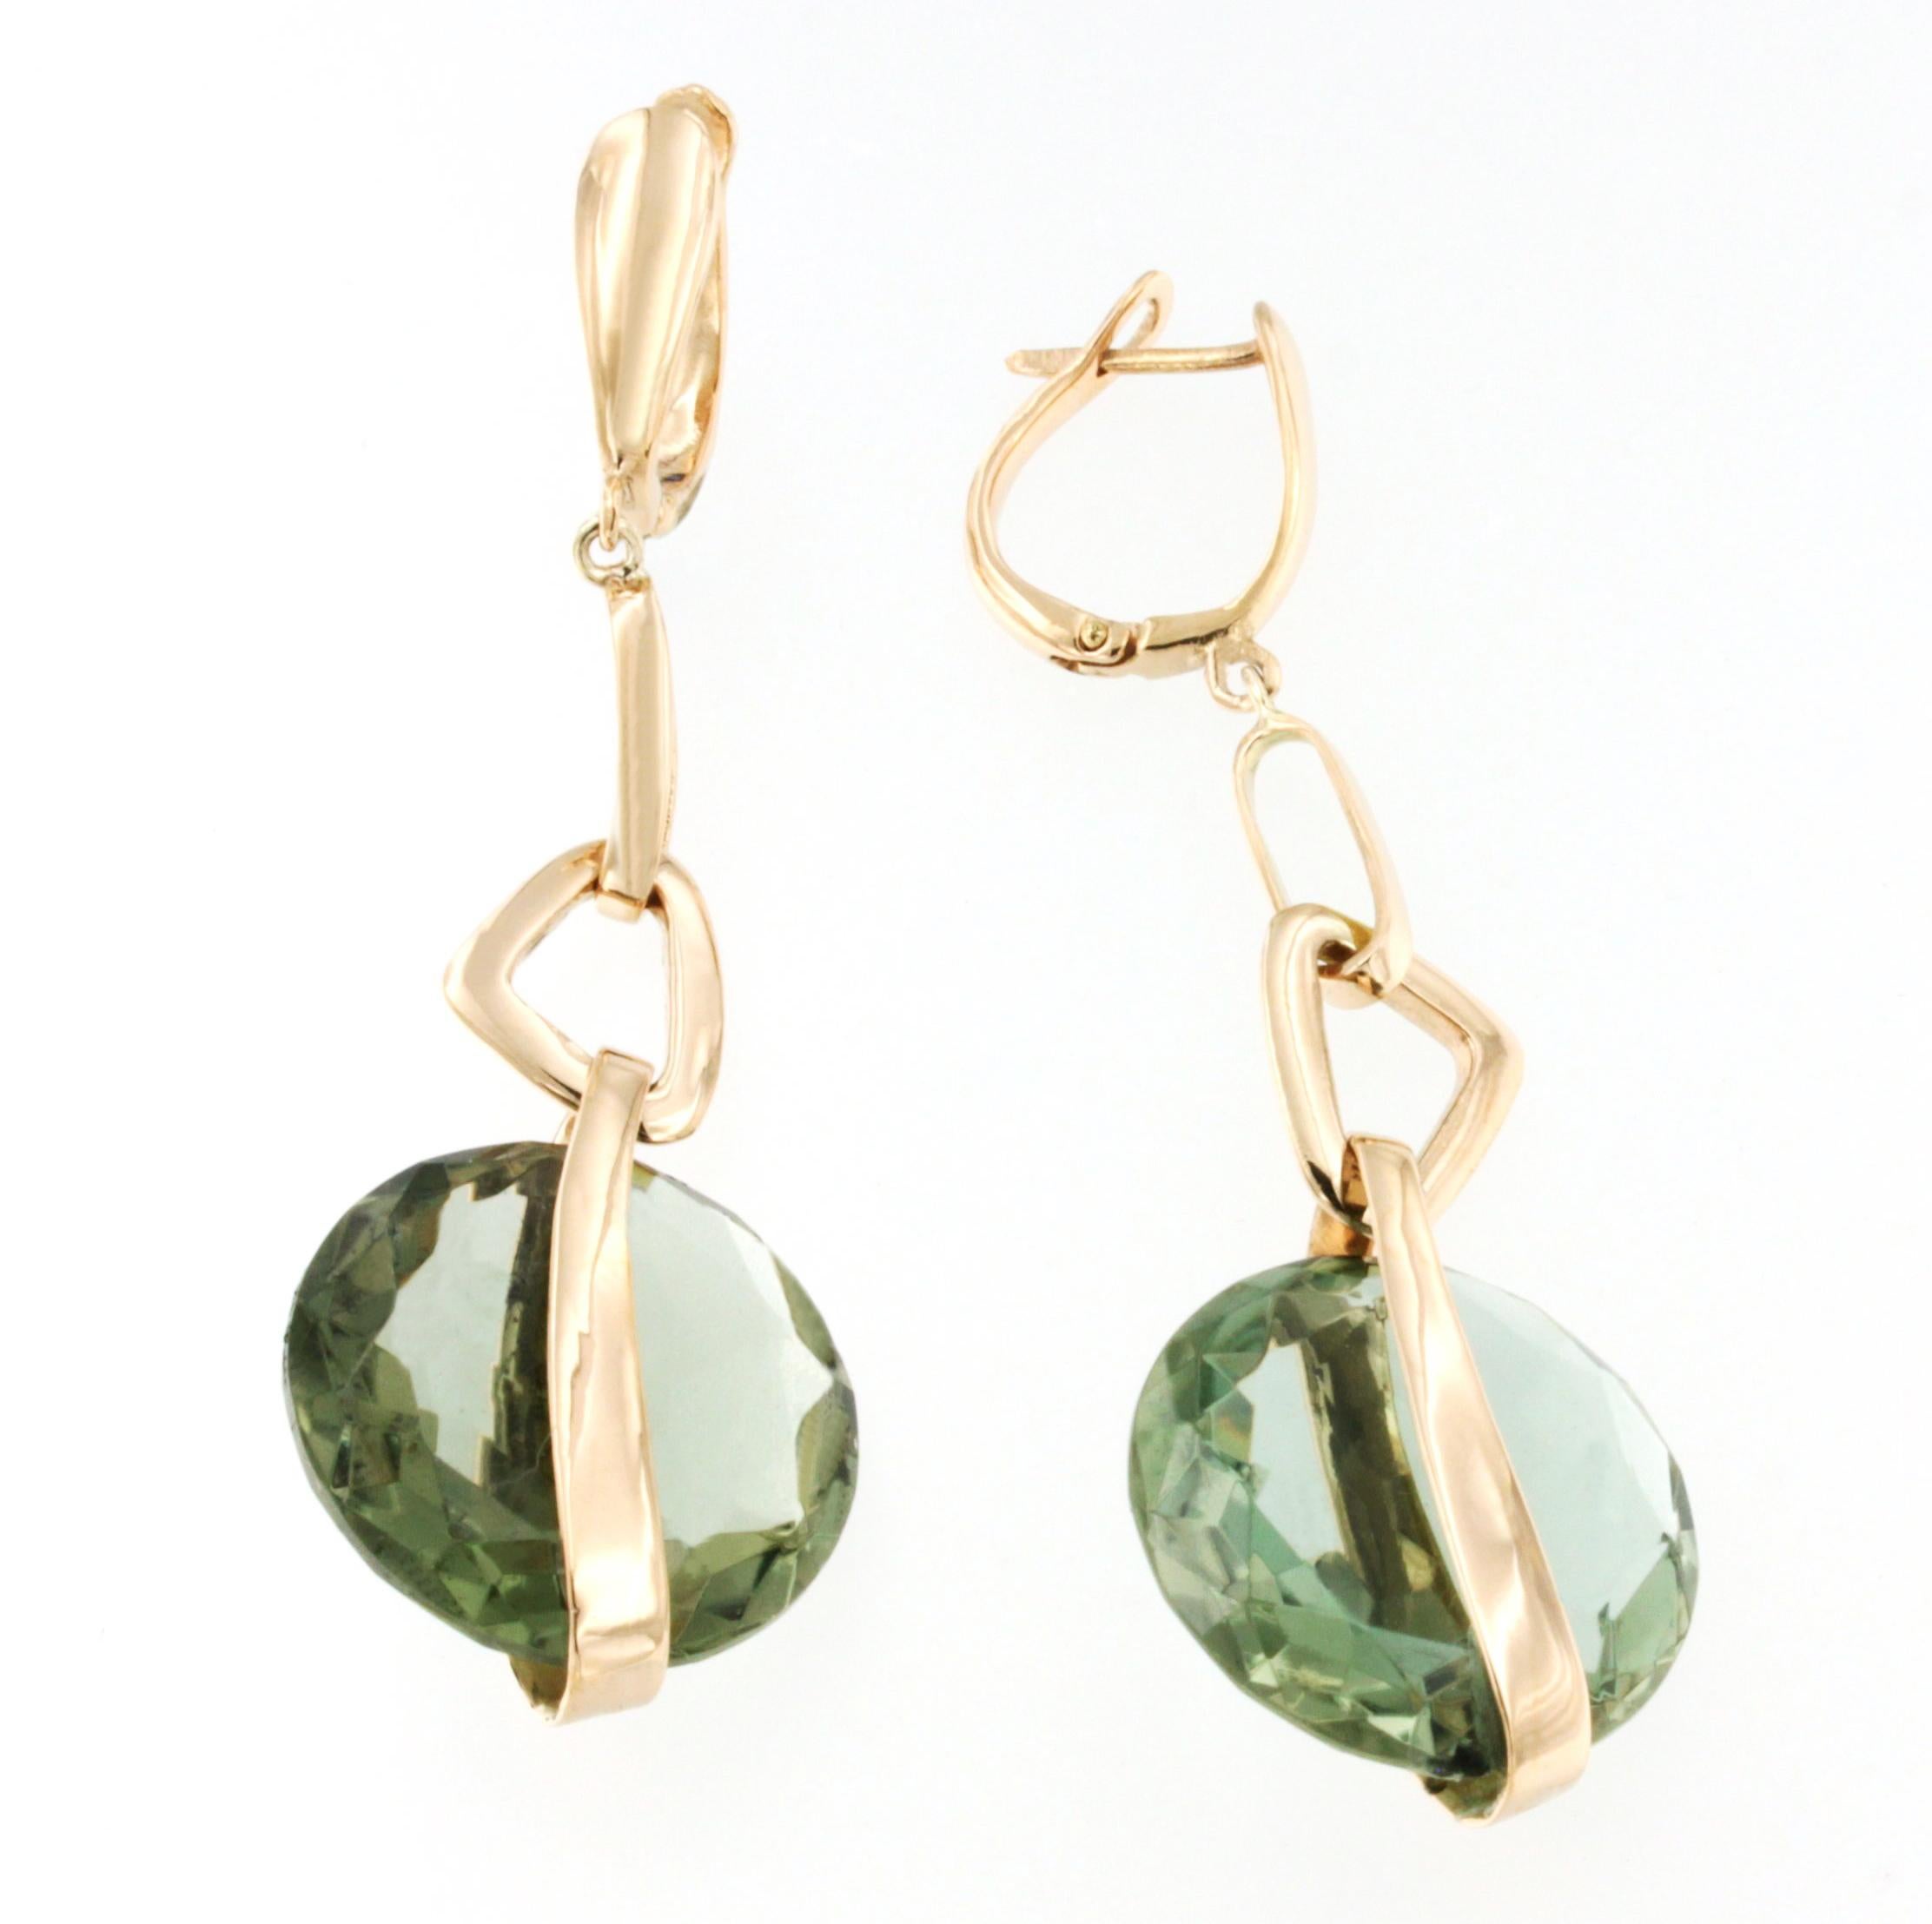 Long Earrings in rose gold 18 Karat with green Quartz (round cut, size: 20 mm)

All Stanoppi Jewelry is new and has never been previously owned or worn. Each item will arrive at your door beautifully gift wrapped in Stanoppi  boxes, put inside an